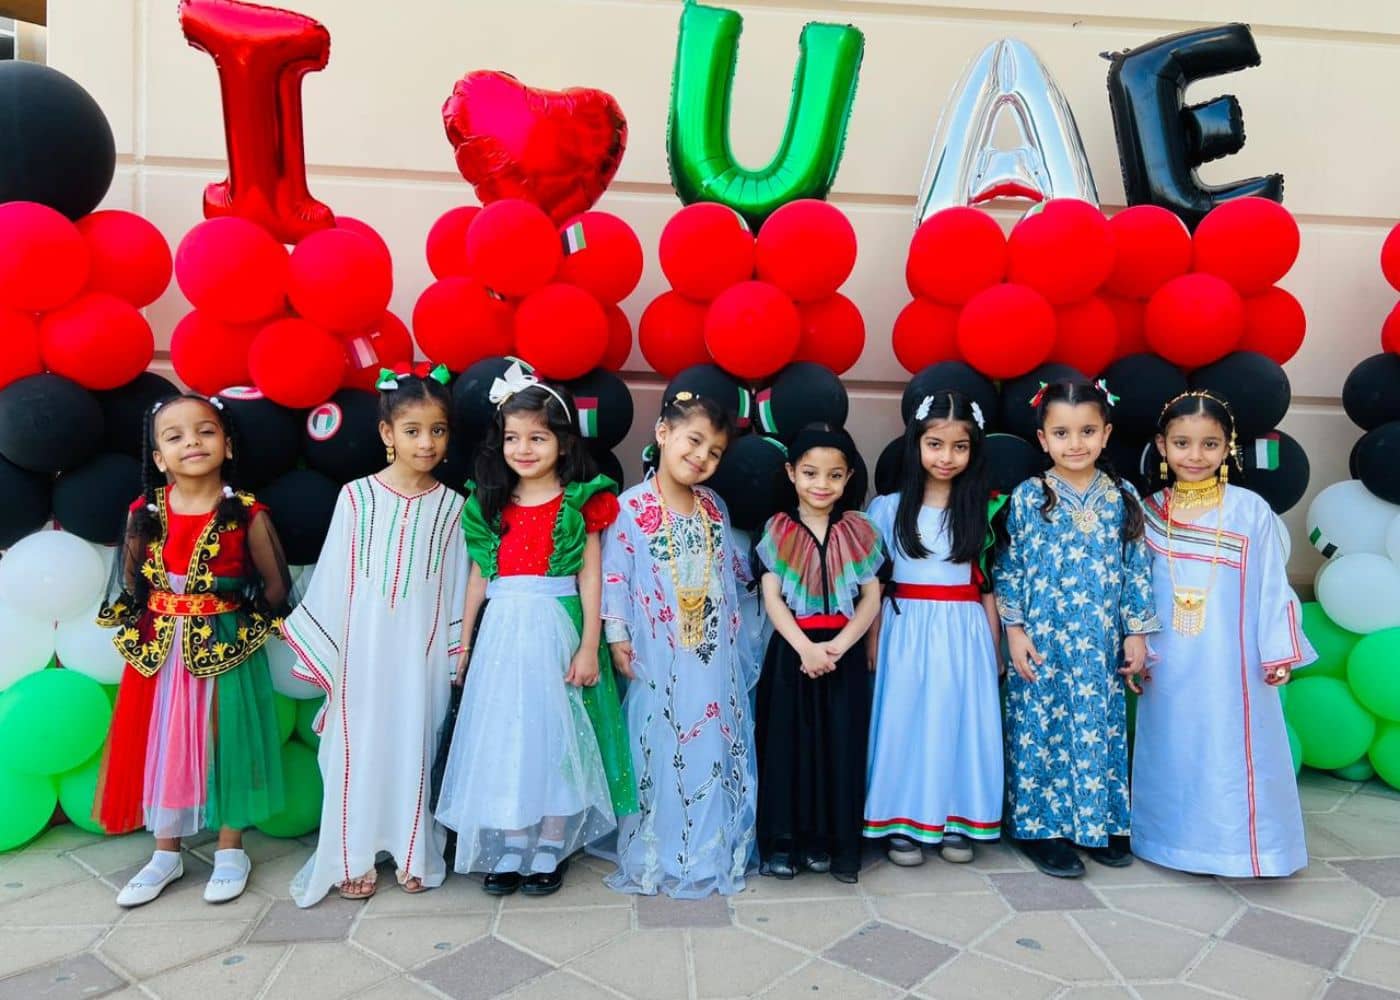 Students of Abu Dhabi International School at the National Day event